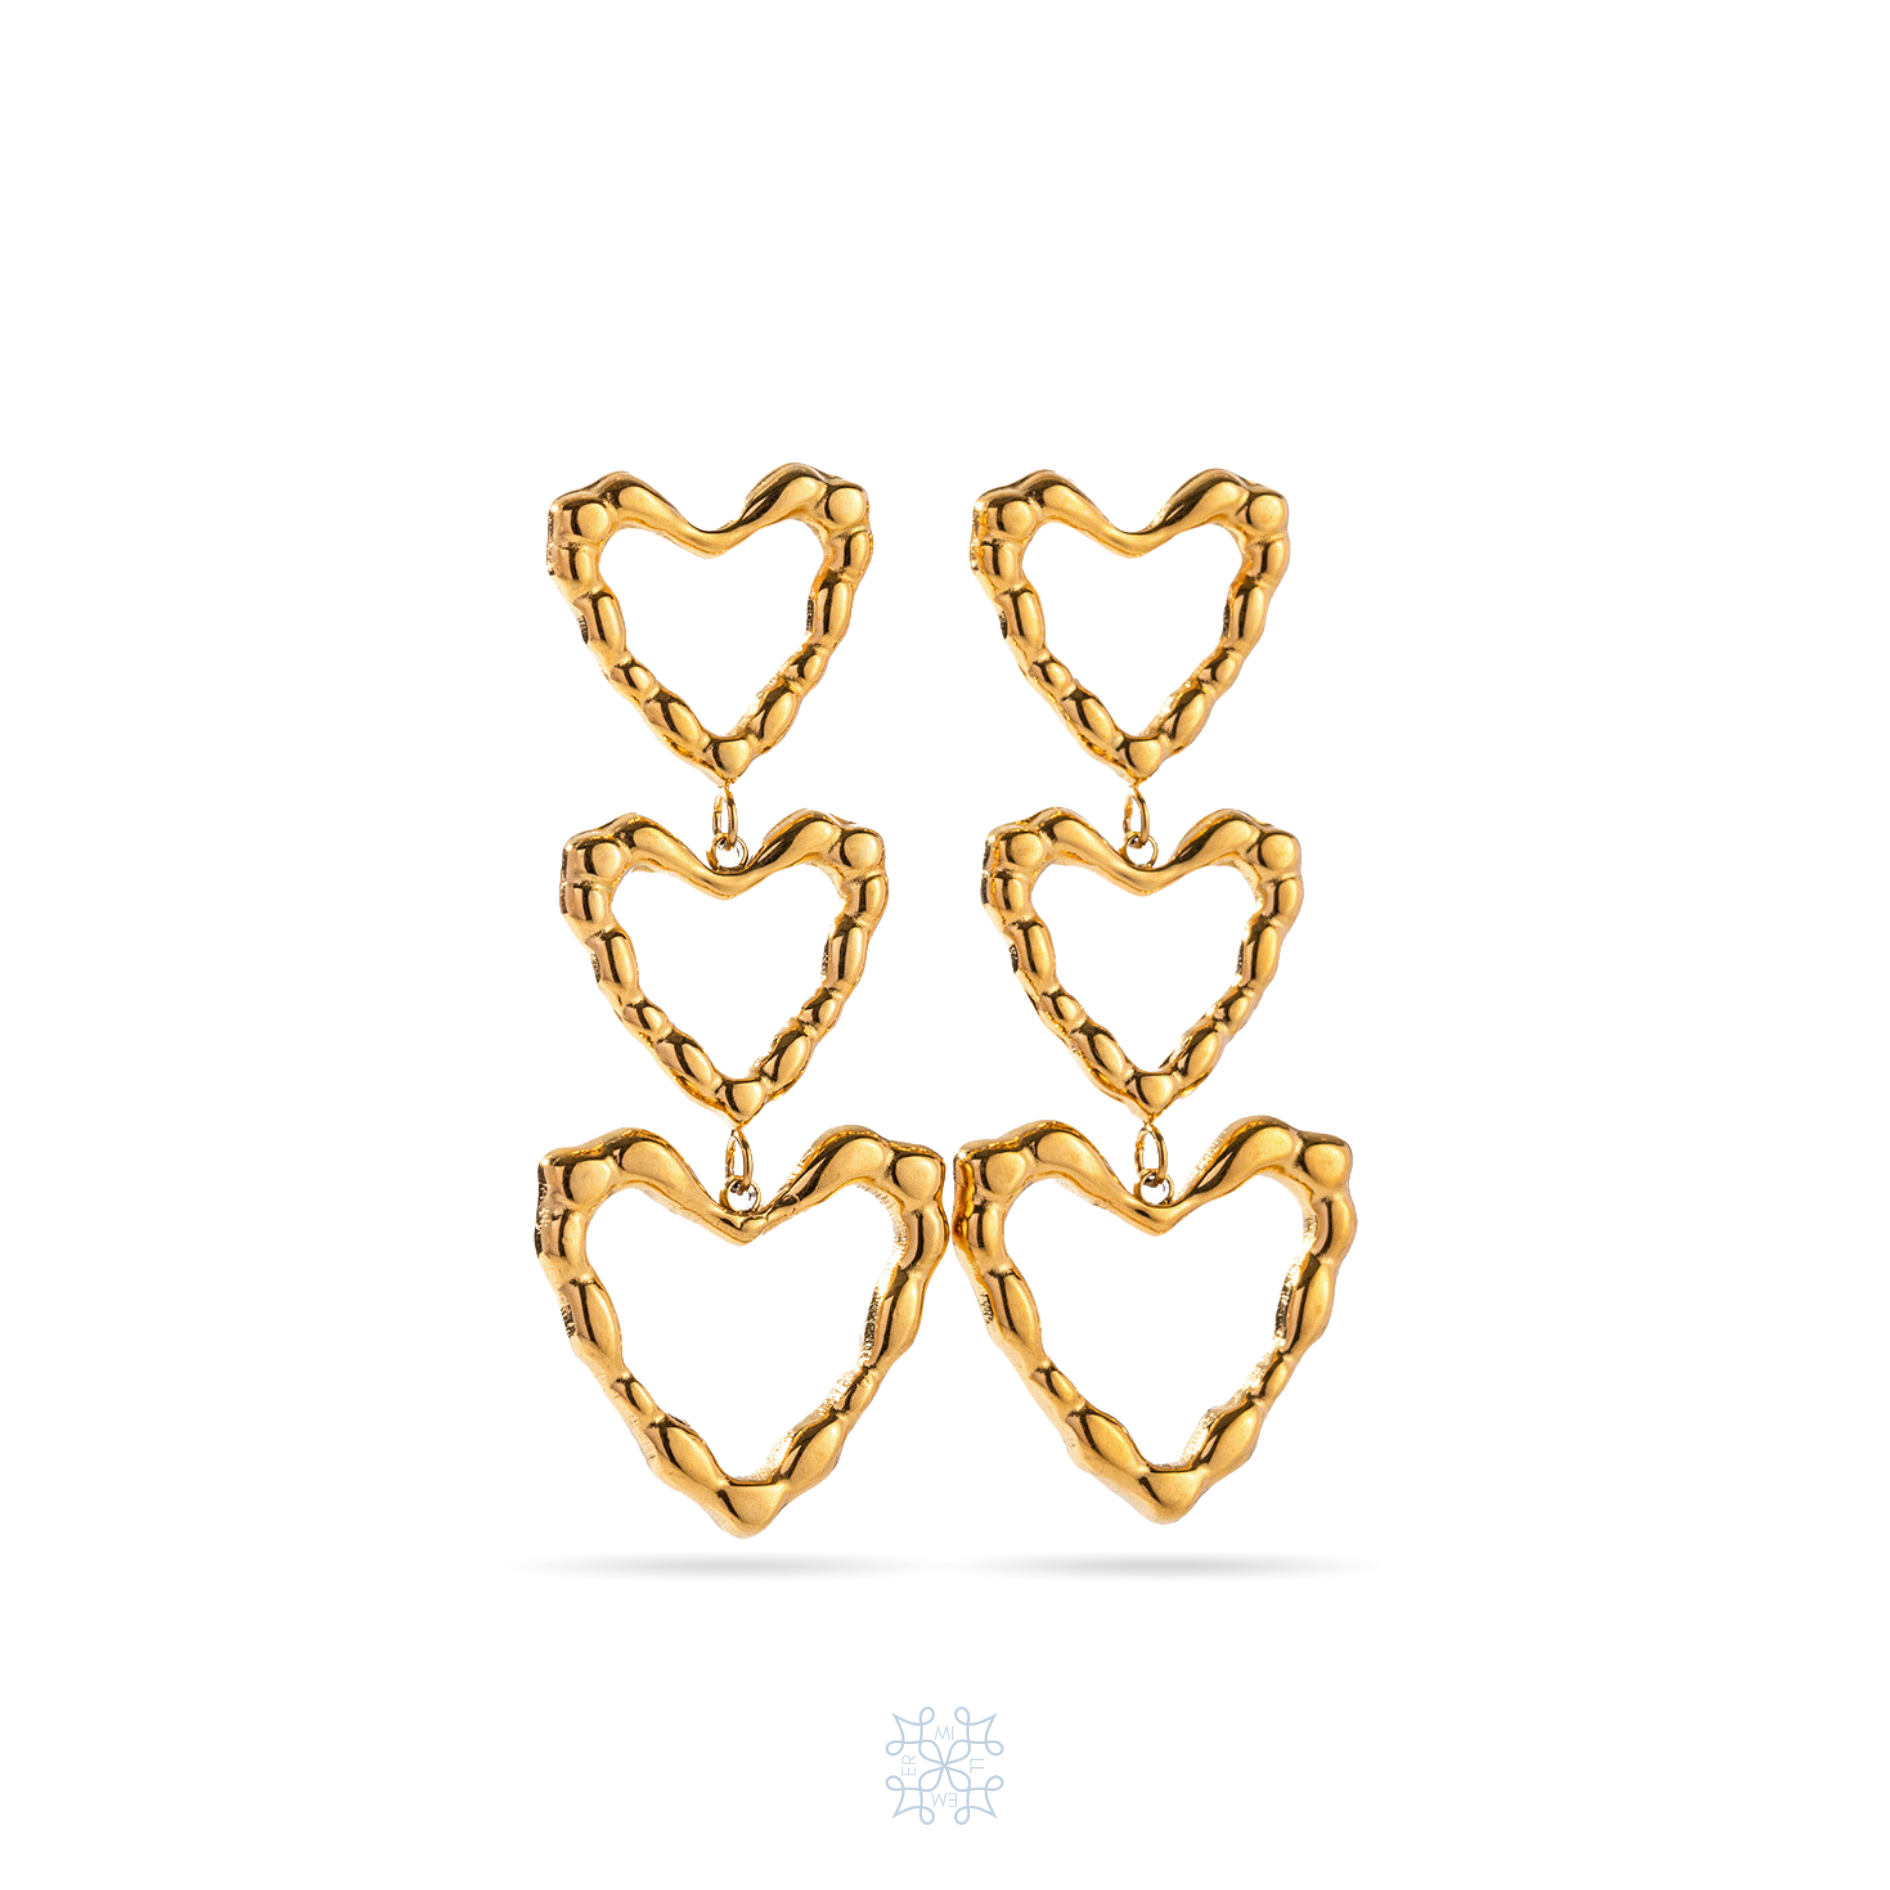 Gold Drop Earrings. Three Hearts attached one to another to form a drop earring. The hearts are empty in the inside surface forming onlu heart frames. The biggest heart drop at the bottom. The surface is irregular.